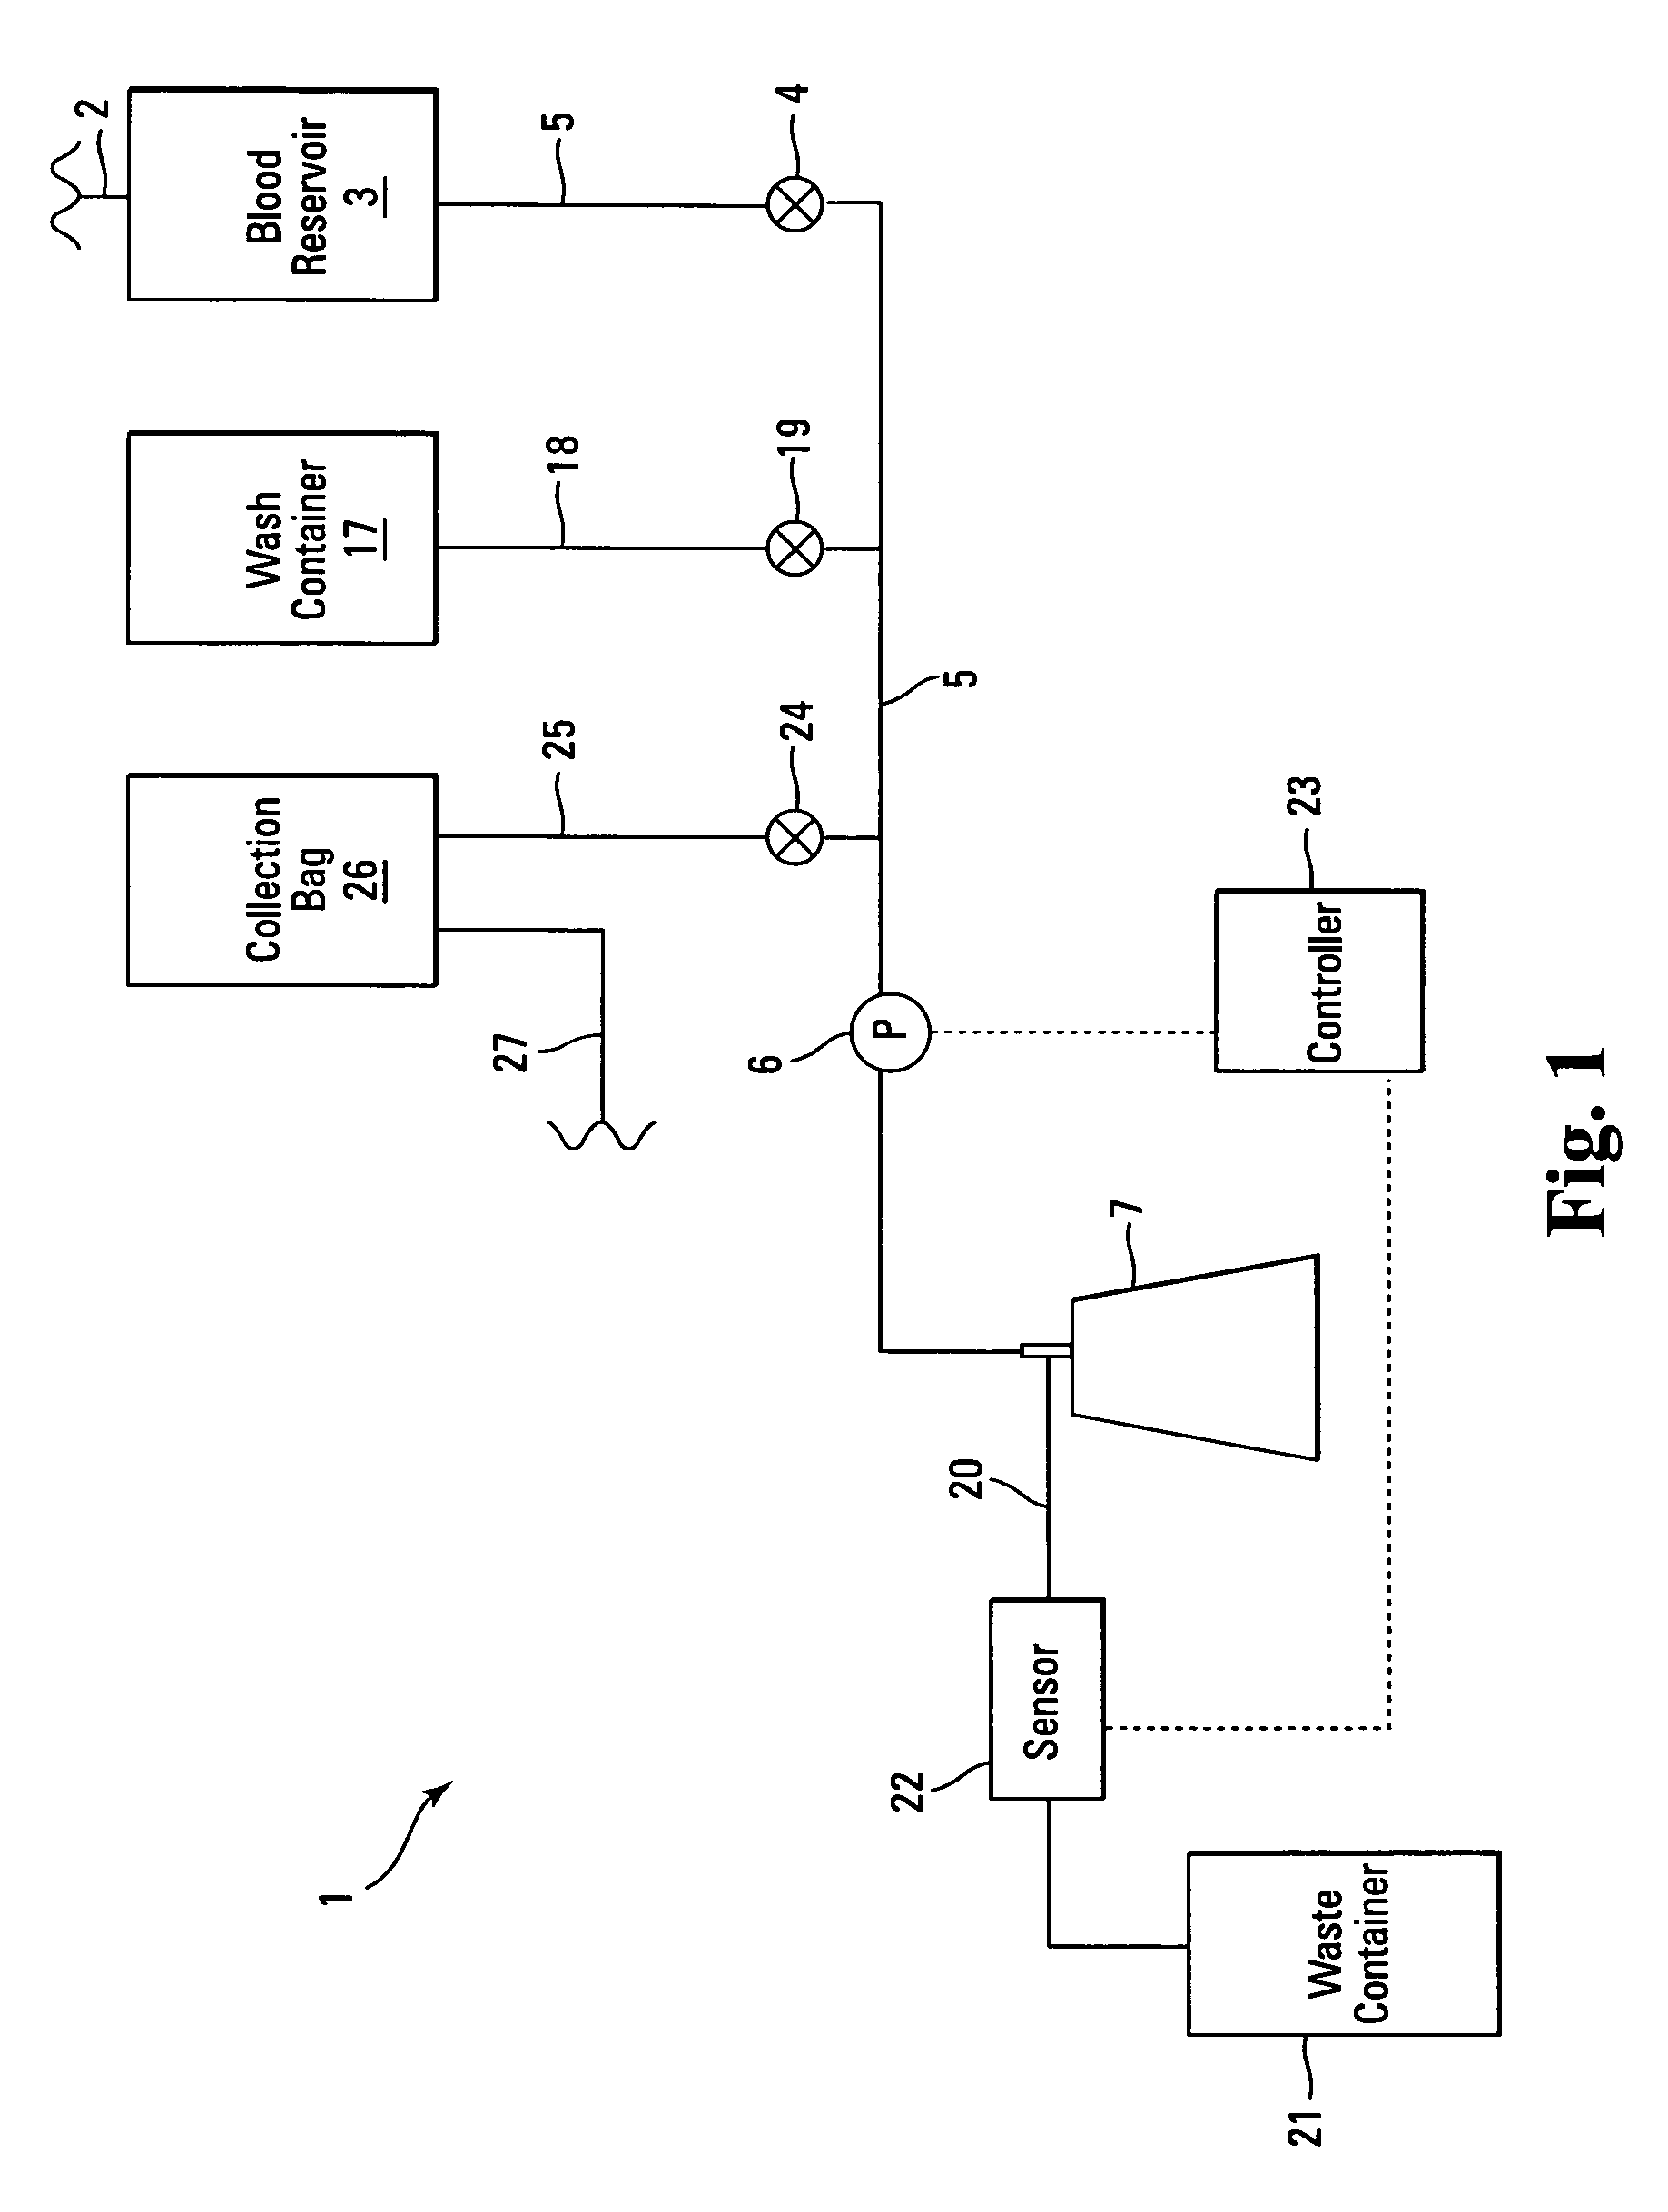 Method and apparatus for controlling the flow rate of washing solution during the washing step in a blood centrifugation bowl